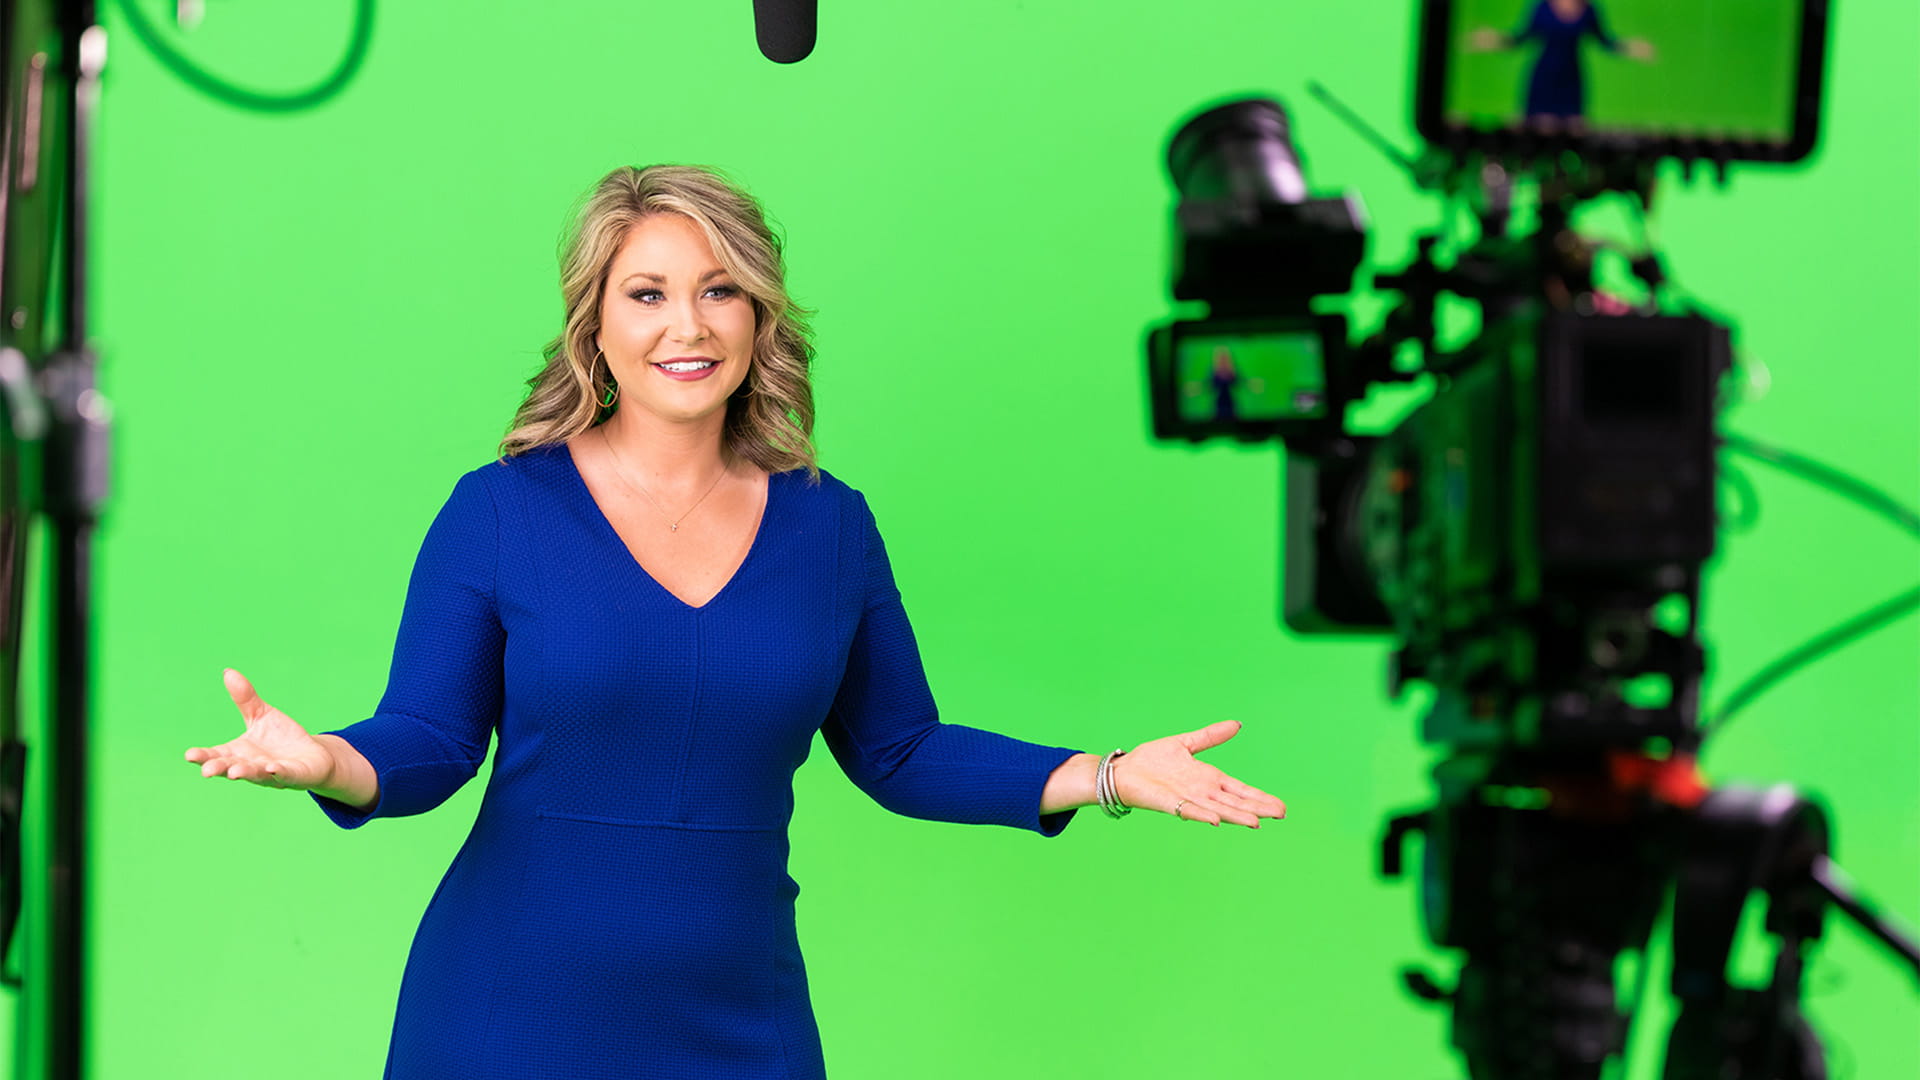 Meaghan Thomas, Broadcast Meteorologist, wearing Signia hearing aids in front of green screen